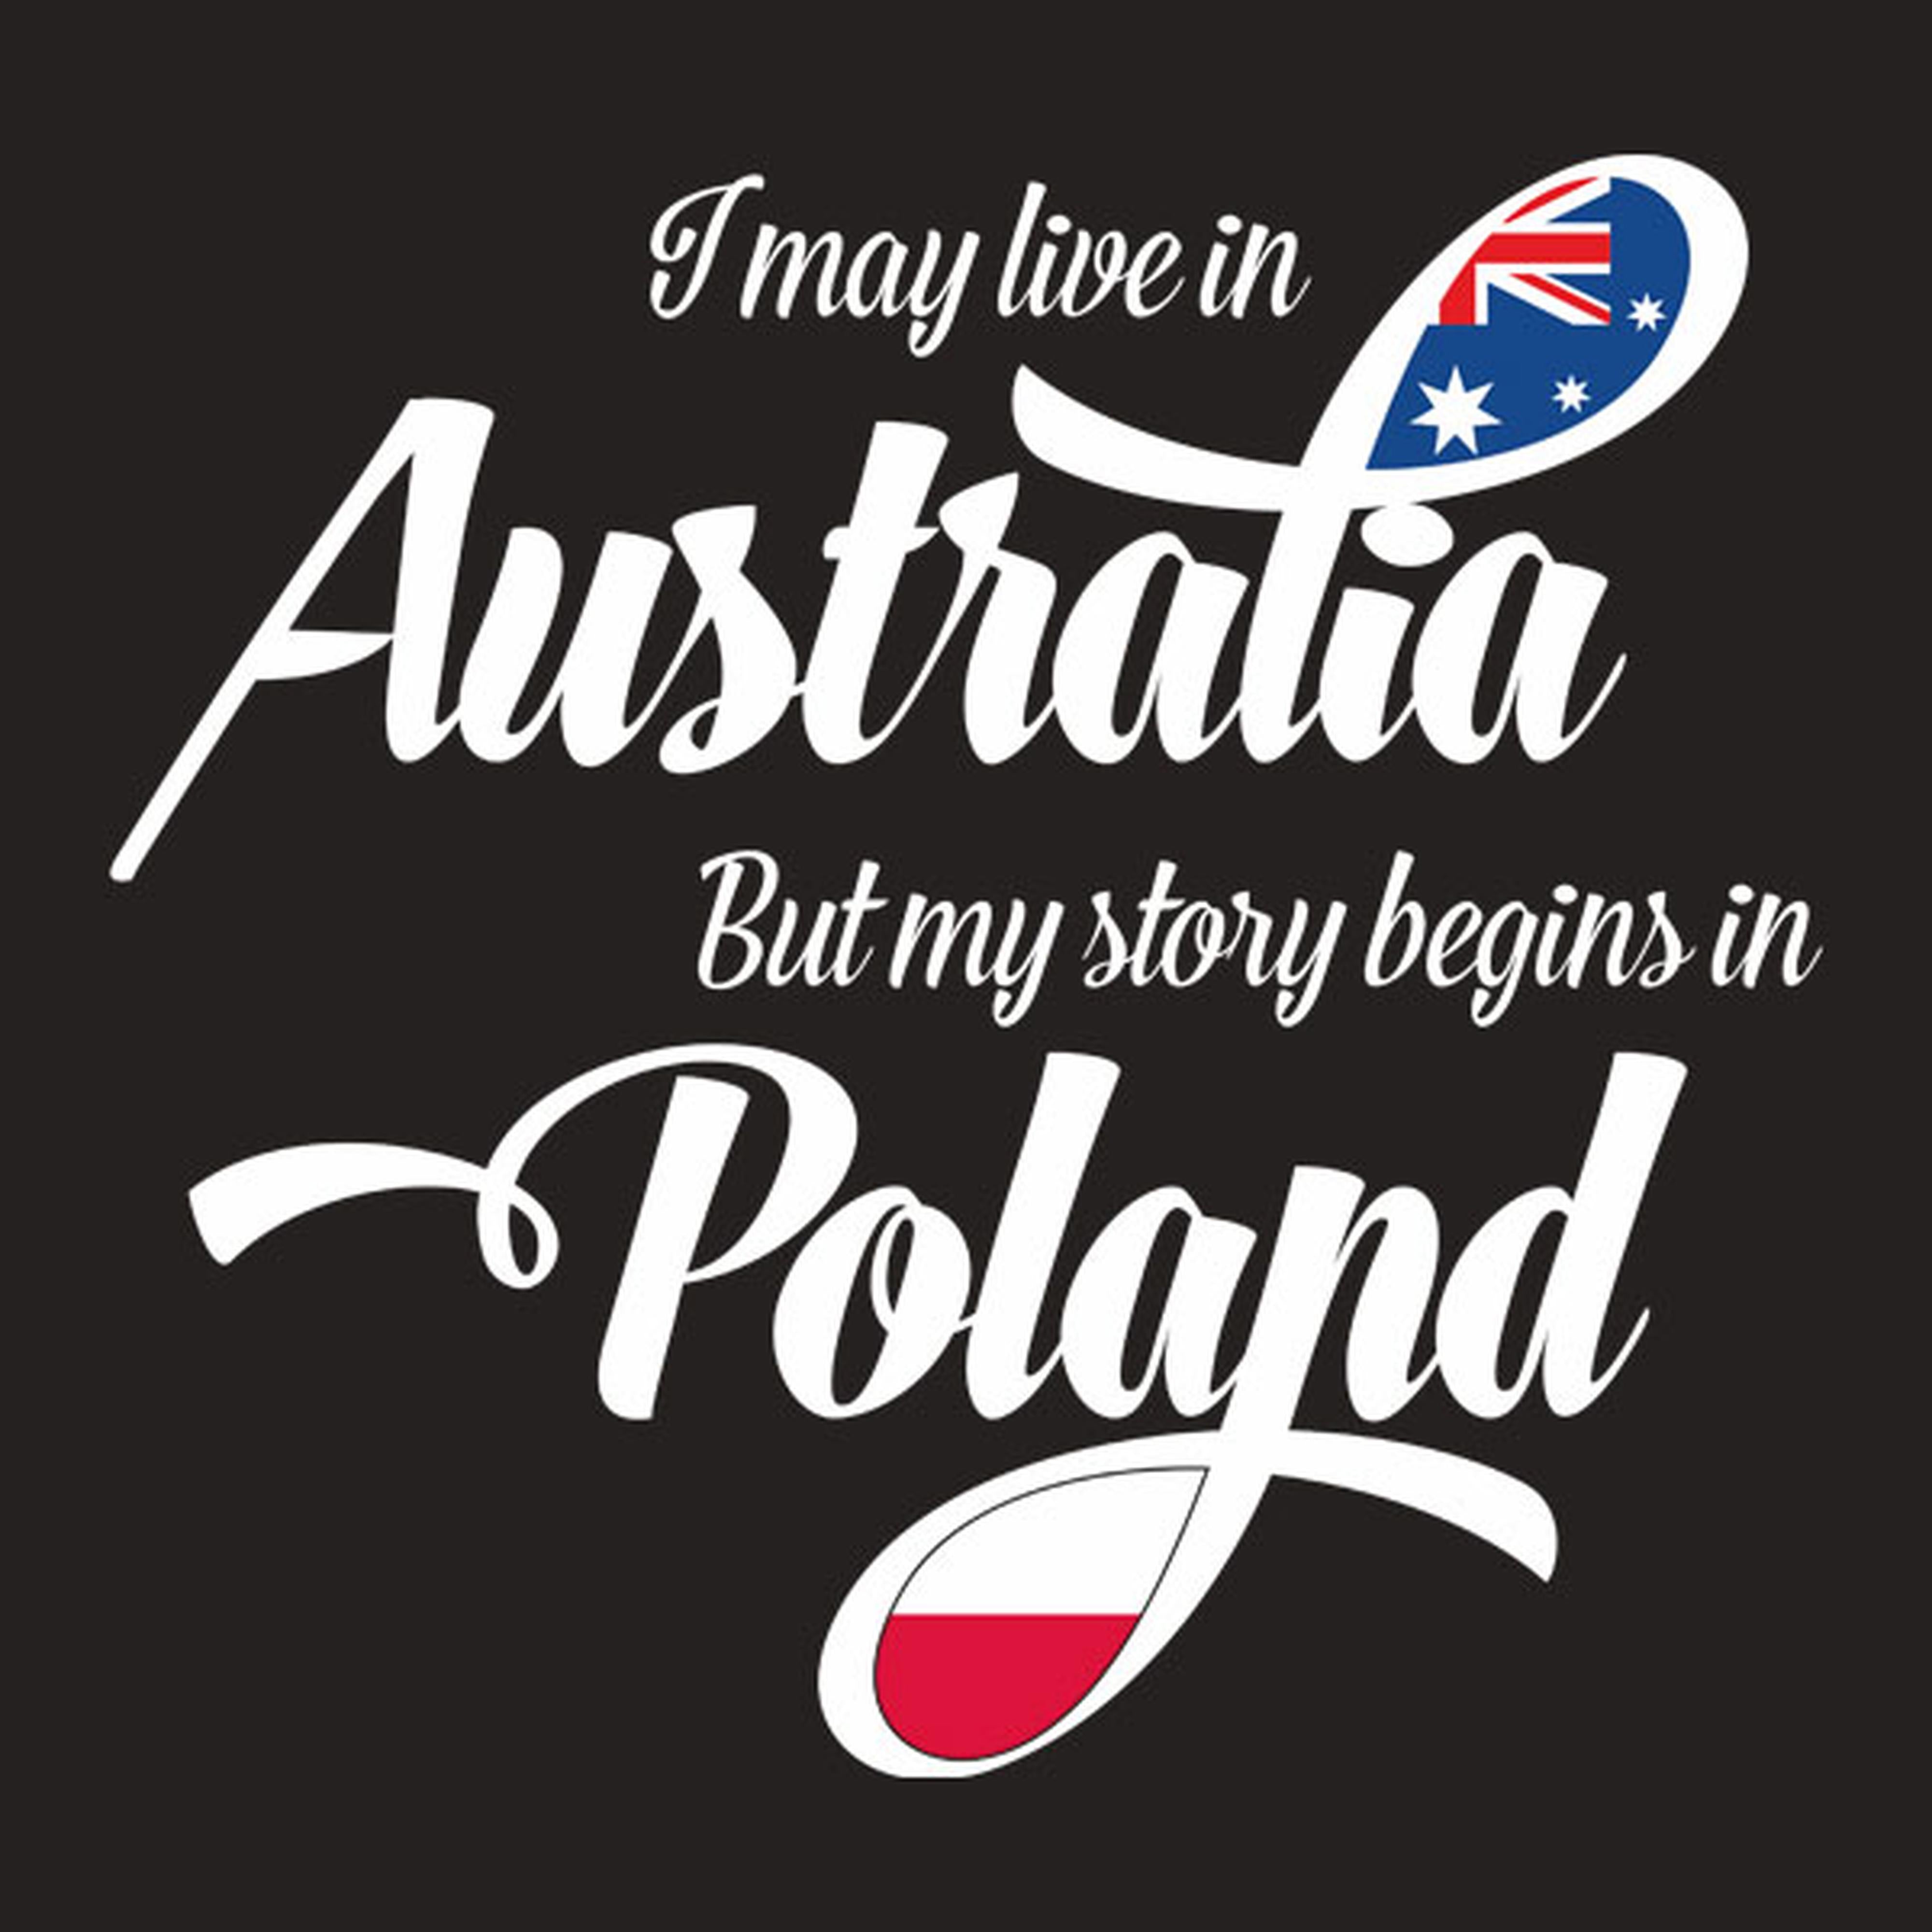 I may live in Australia but my story begins in Poland - T-shirt